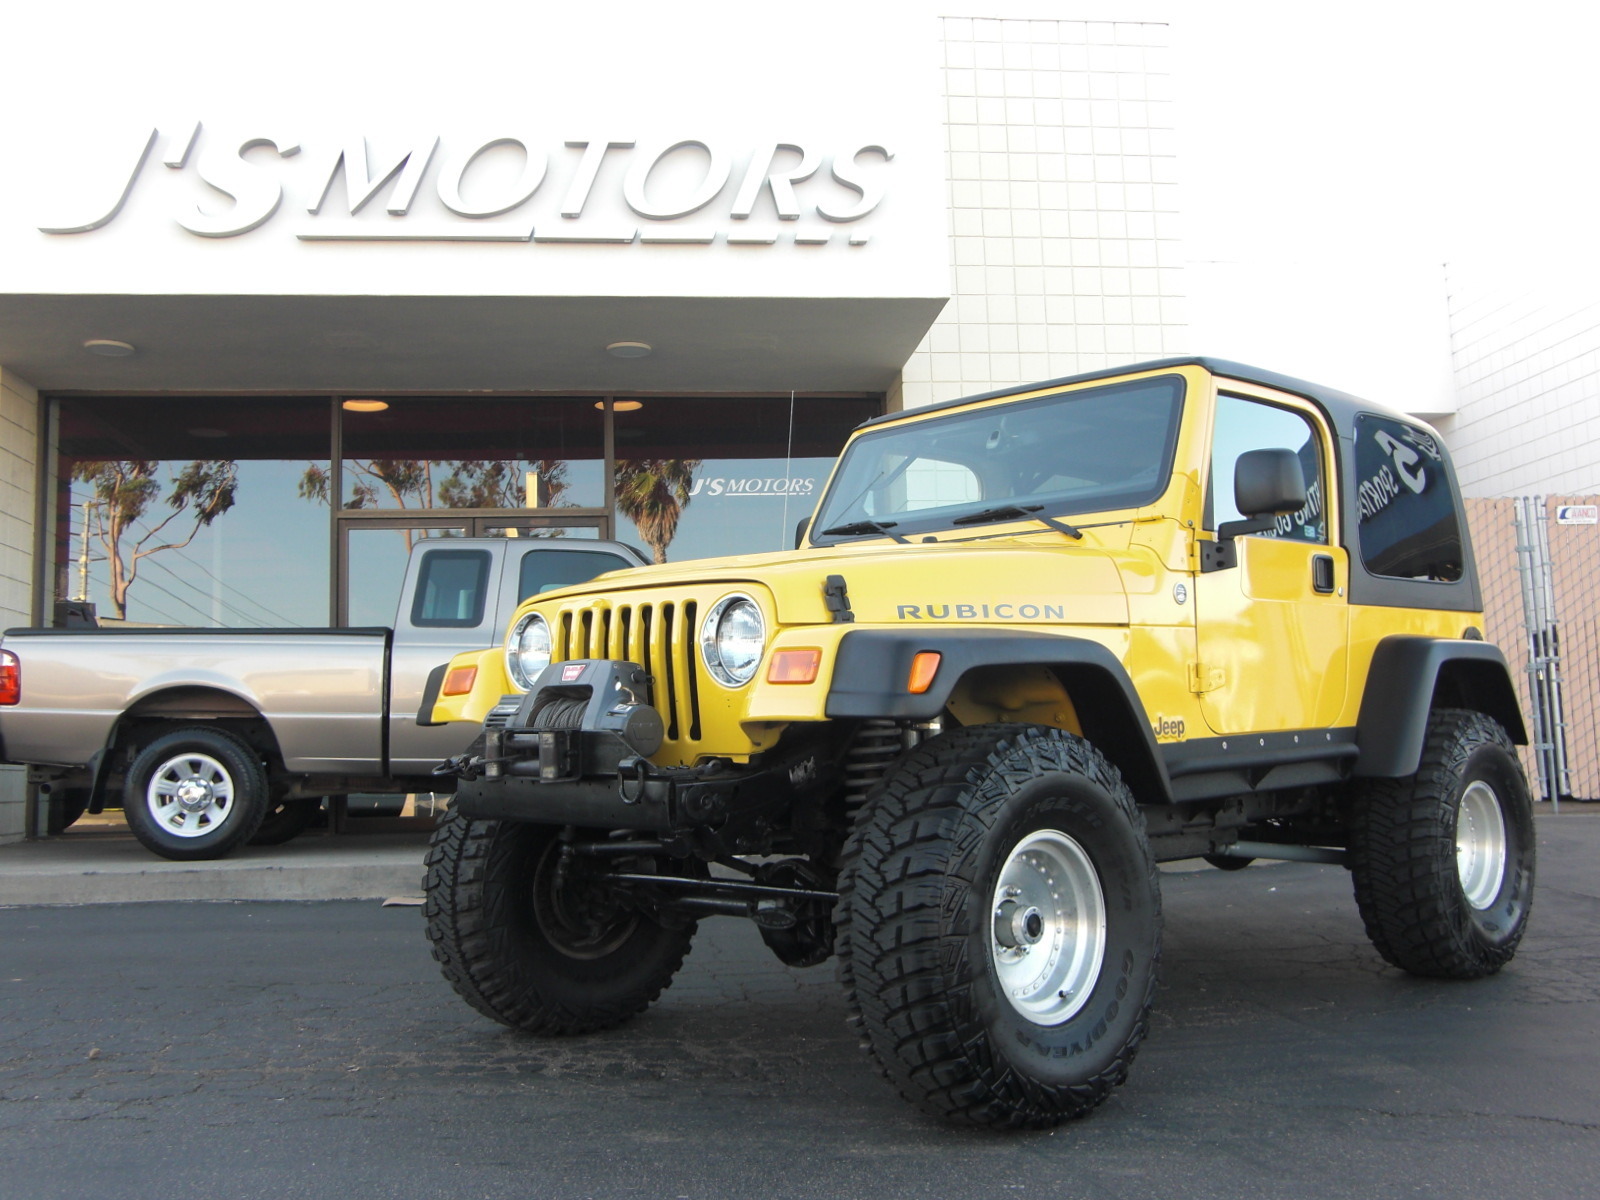 Used 2006 Jeep Wrangler for Sale Right Now - Autotrader